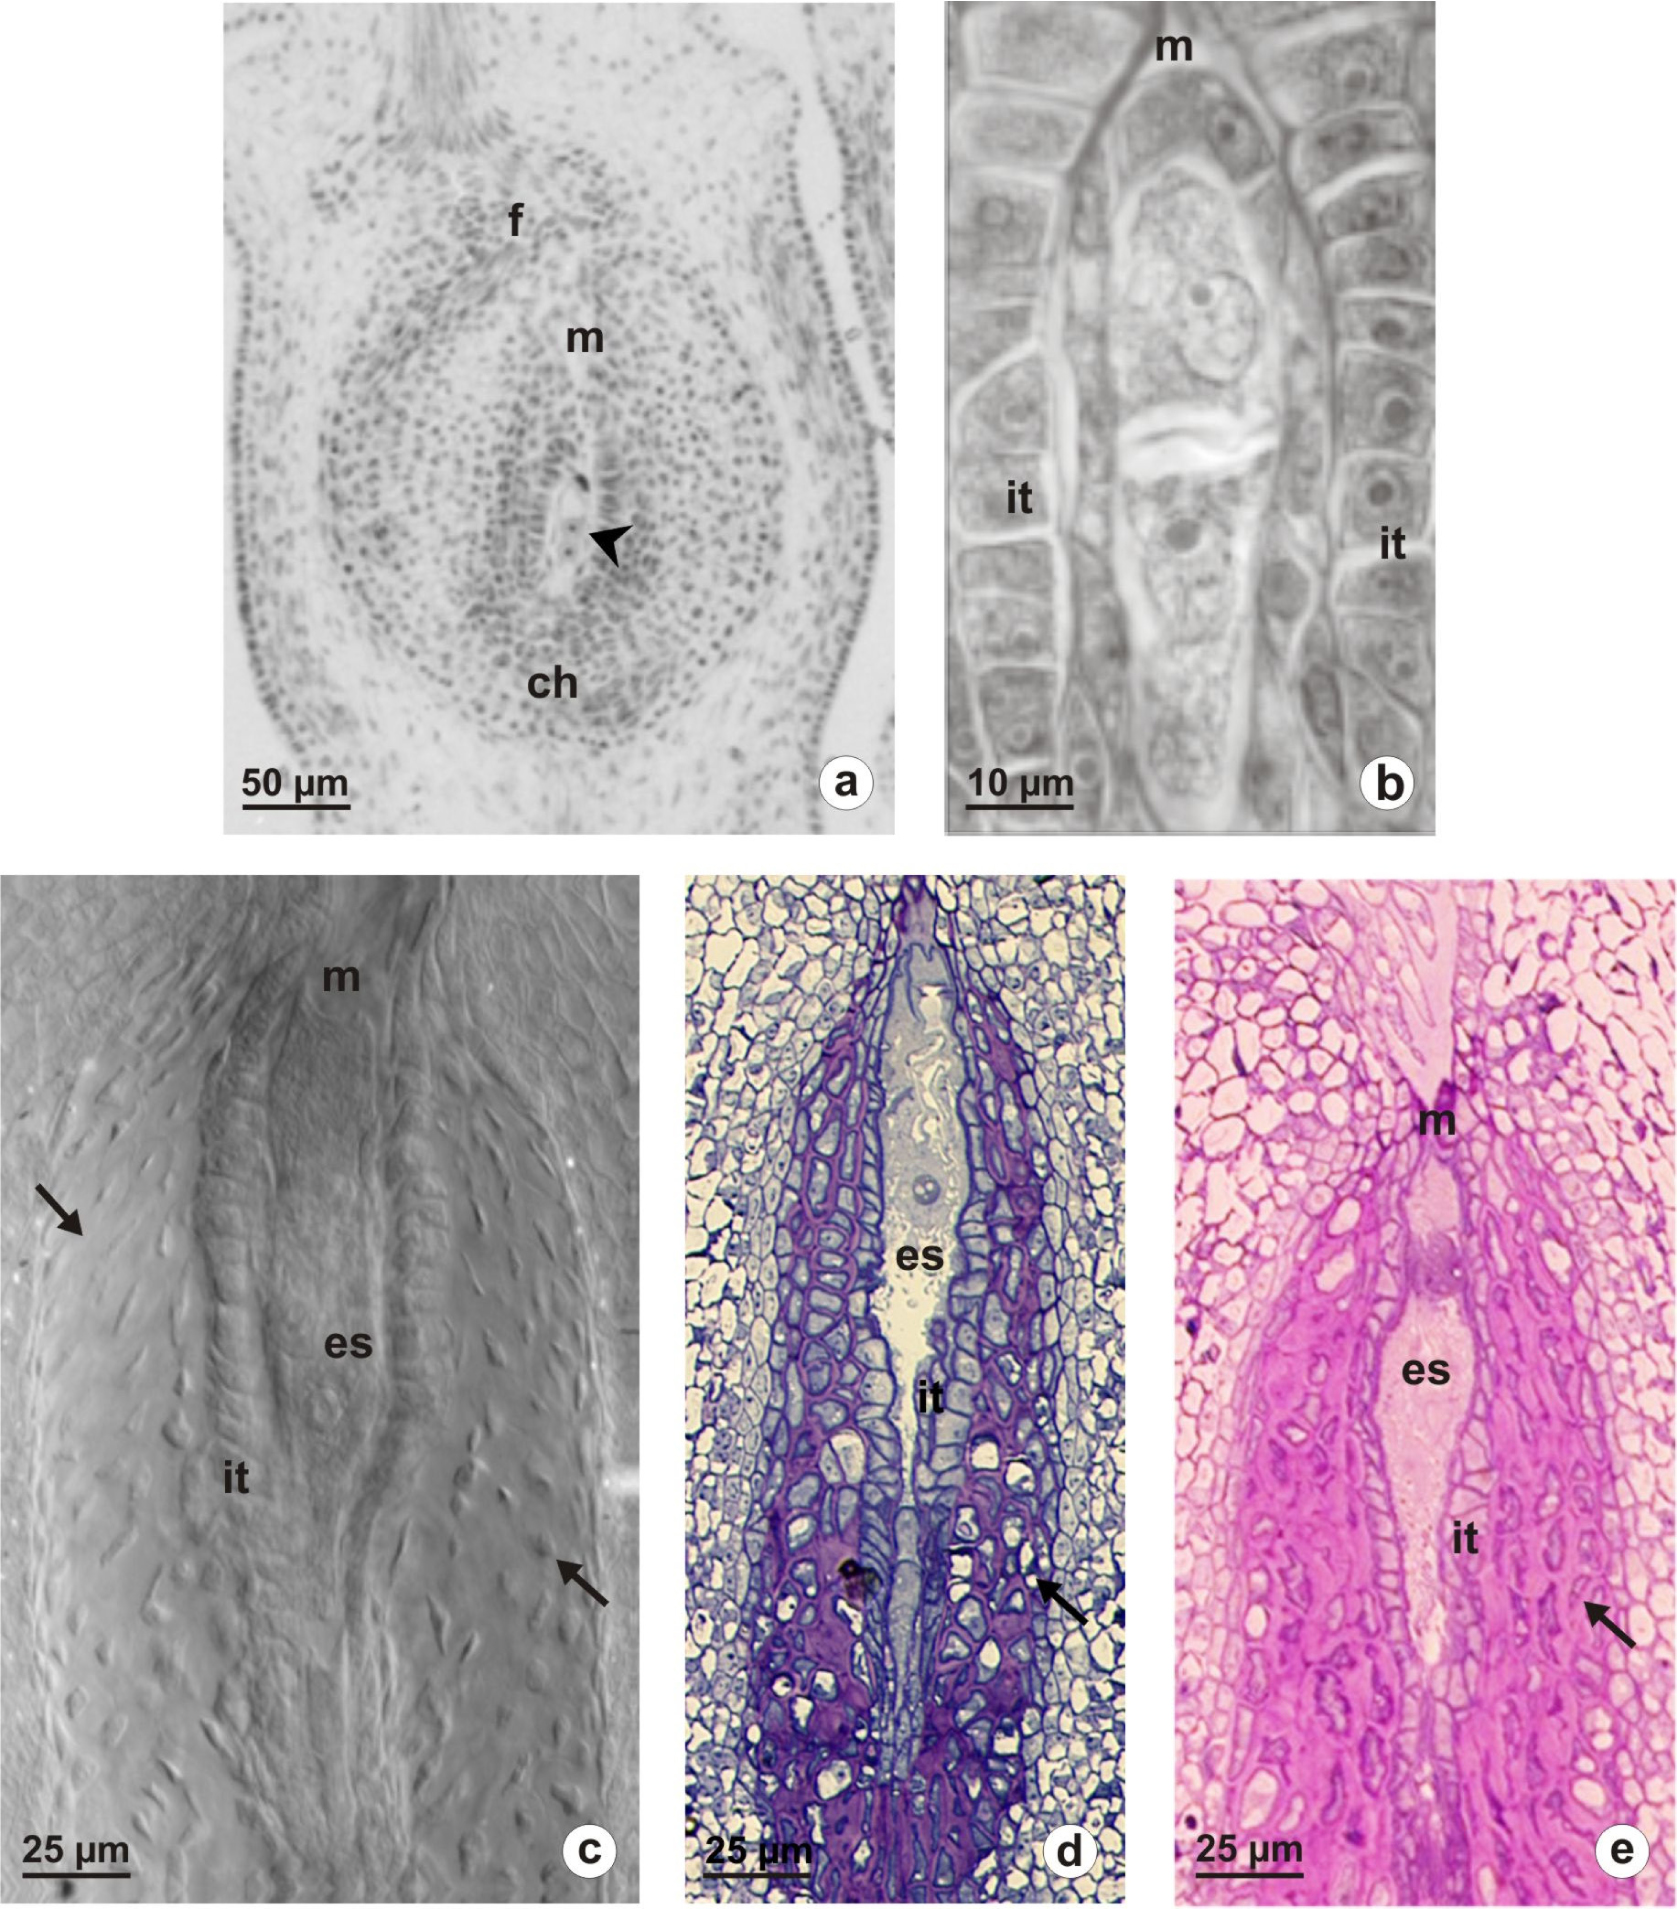 Fig 1. Ovule structure of Taraxacum udum (a, c) and Chondrilla juncea (b, d, e): a – longitudinal section of ovary with anatropous, unitegmic ovule, arrowhead indicates two-nucleate embryo sac; b – diplodyad surrounded by integumentary tapetum; c – ovule at the stage of mature embryo sac, arrows point to a characteristic somatic nutritive zone around the integumentary tapetum, image was obtained from unstained cleared ovule using Nomarski DIC optic; d – semithin longitudinal section of ovule, arrow indicates layers of thick-walled cells; e – ovule after the periodic acid-Schiff treatment, PAS positive reaction is visible in thick walls of the integumentary cells adjacent to the endothelium (arrow). Abbreviations: ch – chalazal pole; es – embryo sac; f – funiculus; it – integumentary tapetum; m – micropylar pole.